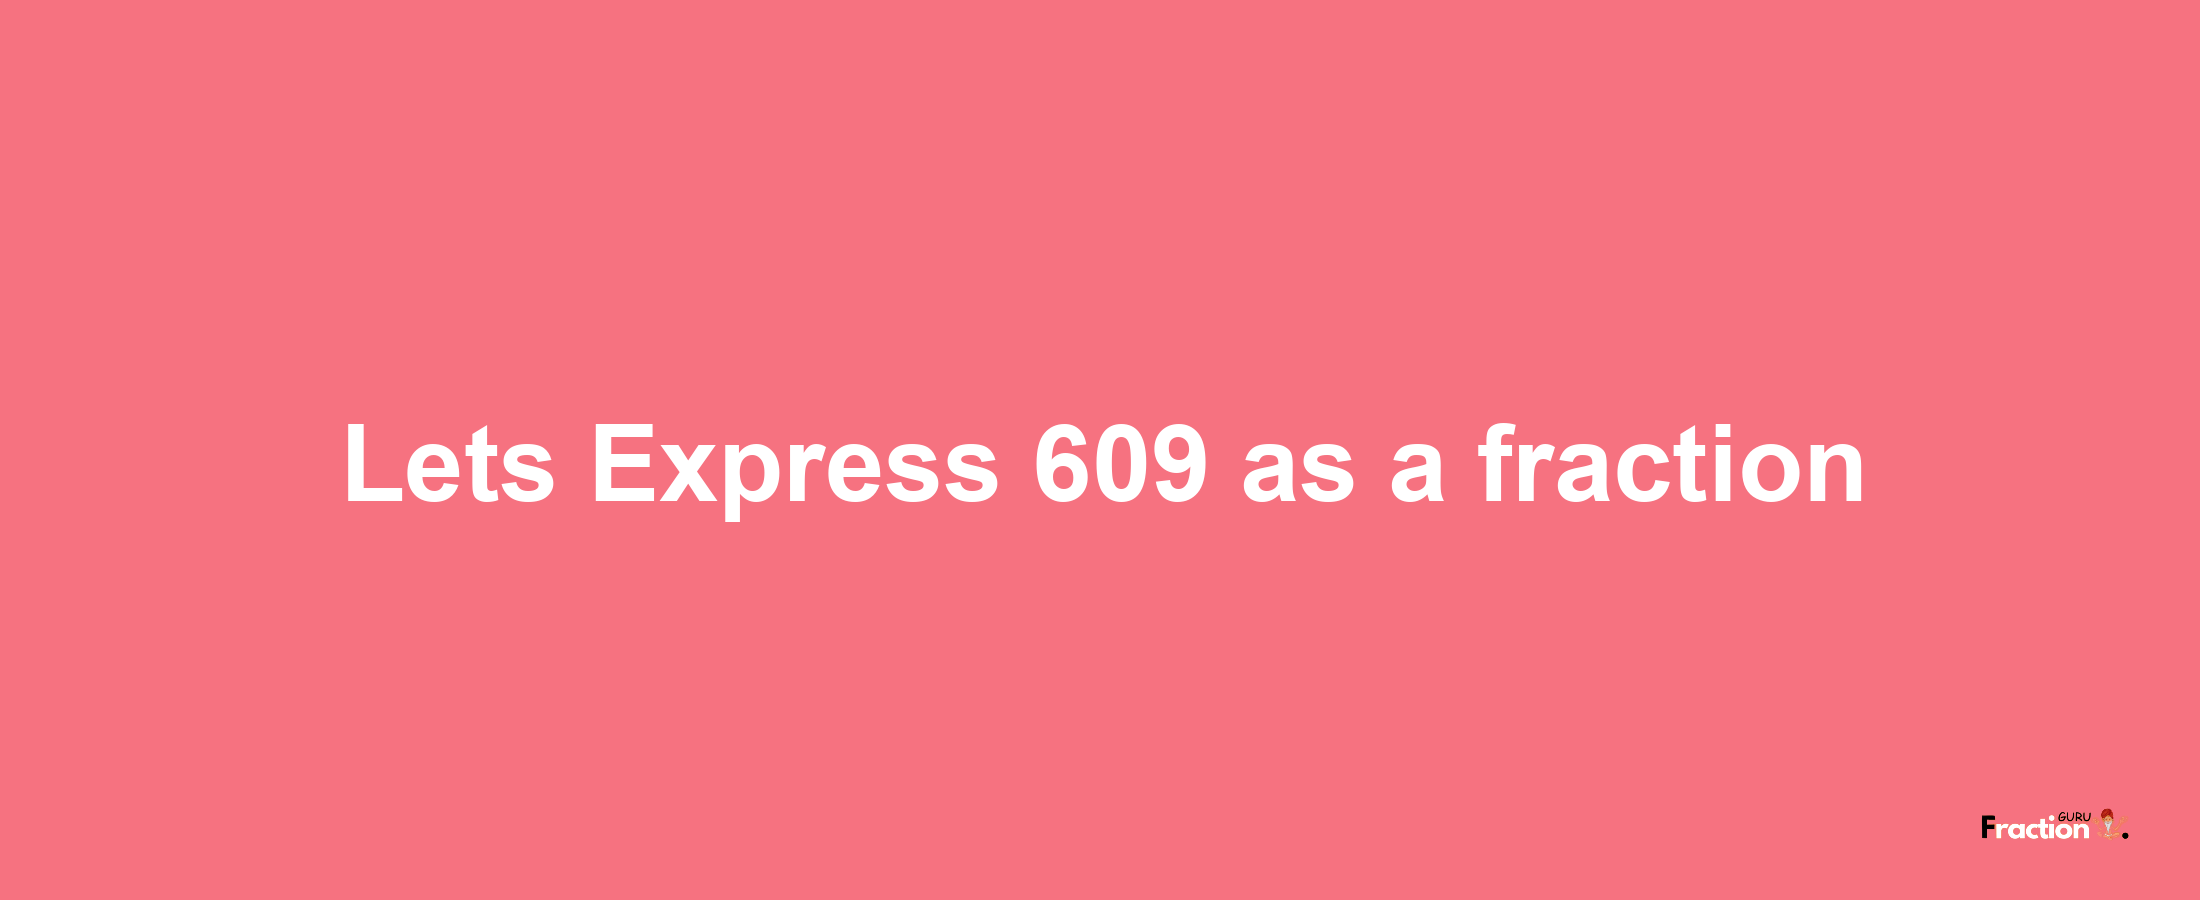 Lets Express 609 as afraction